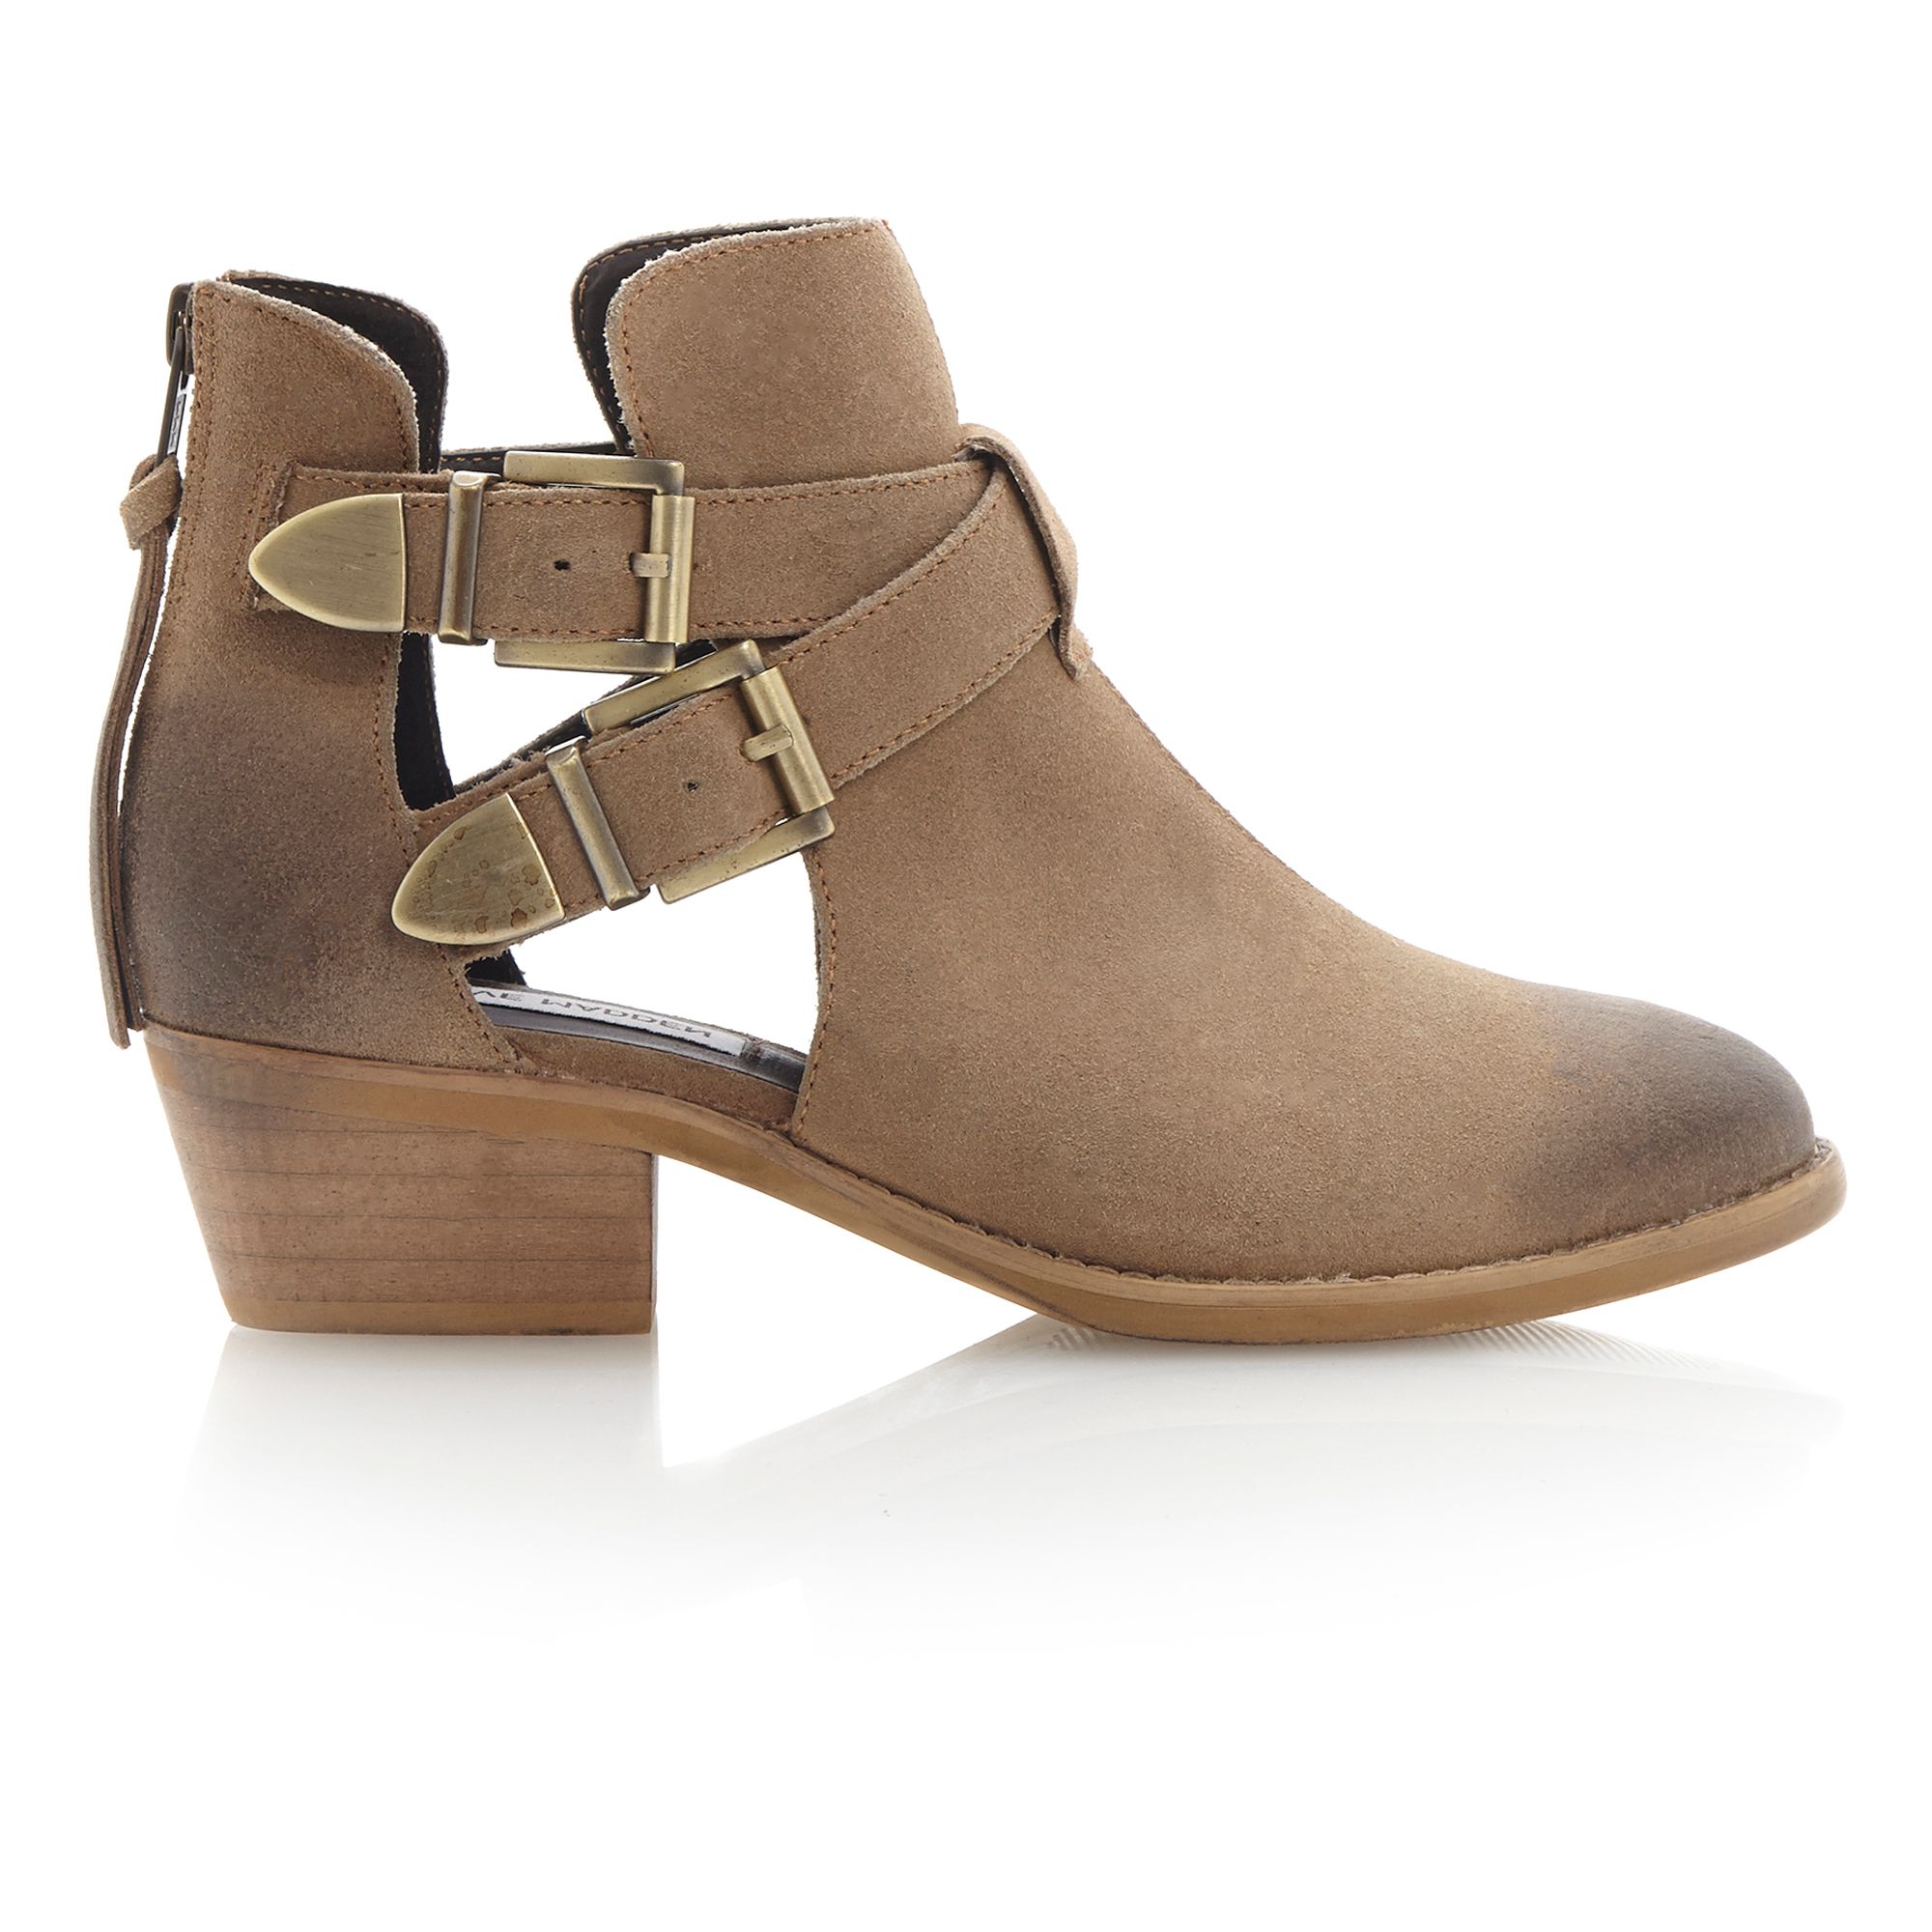 Steve madden Cinch Cut-Out Leather Ankle Boots in Natural | Lyst